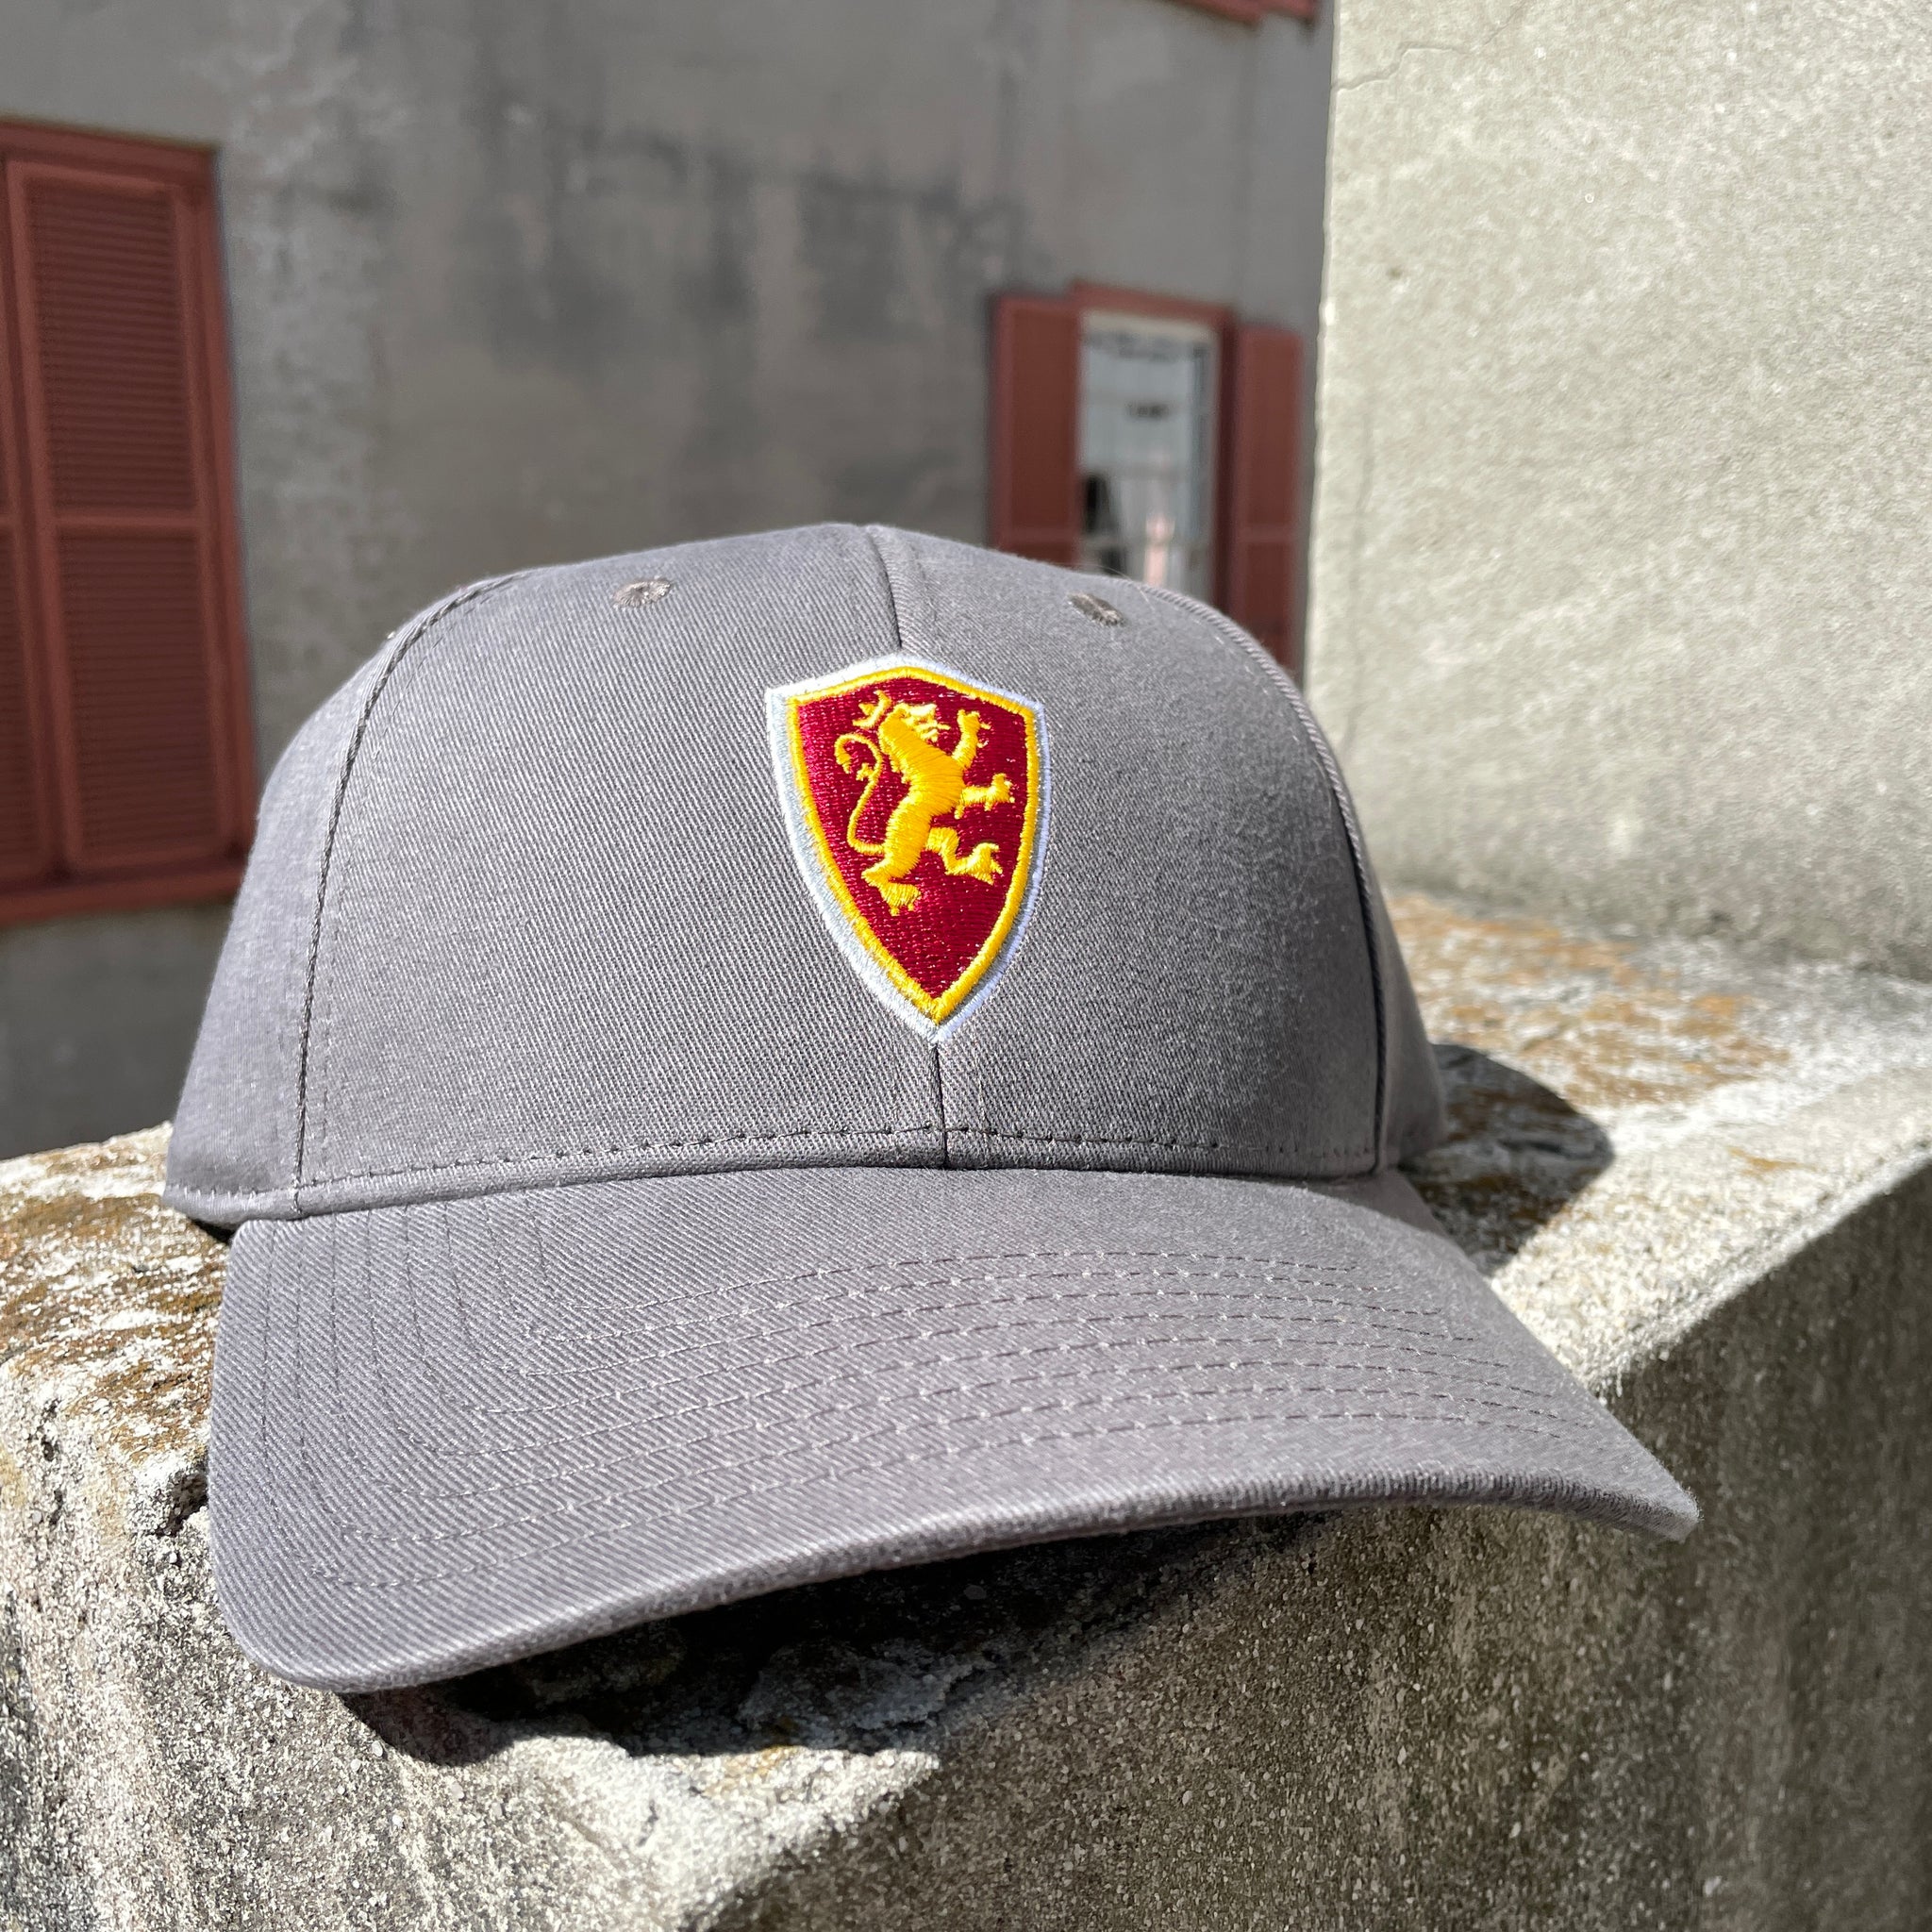 Grey hat with Flagler College Shield Logo in center